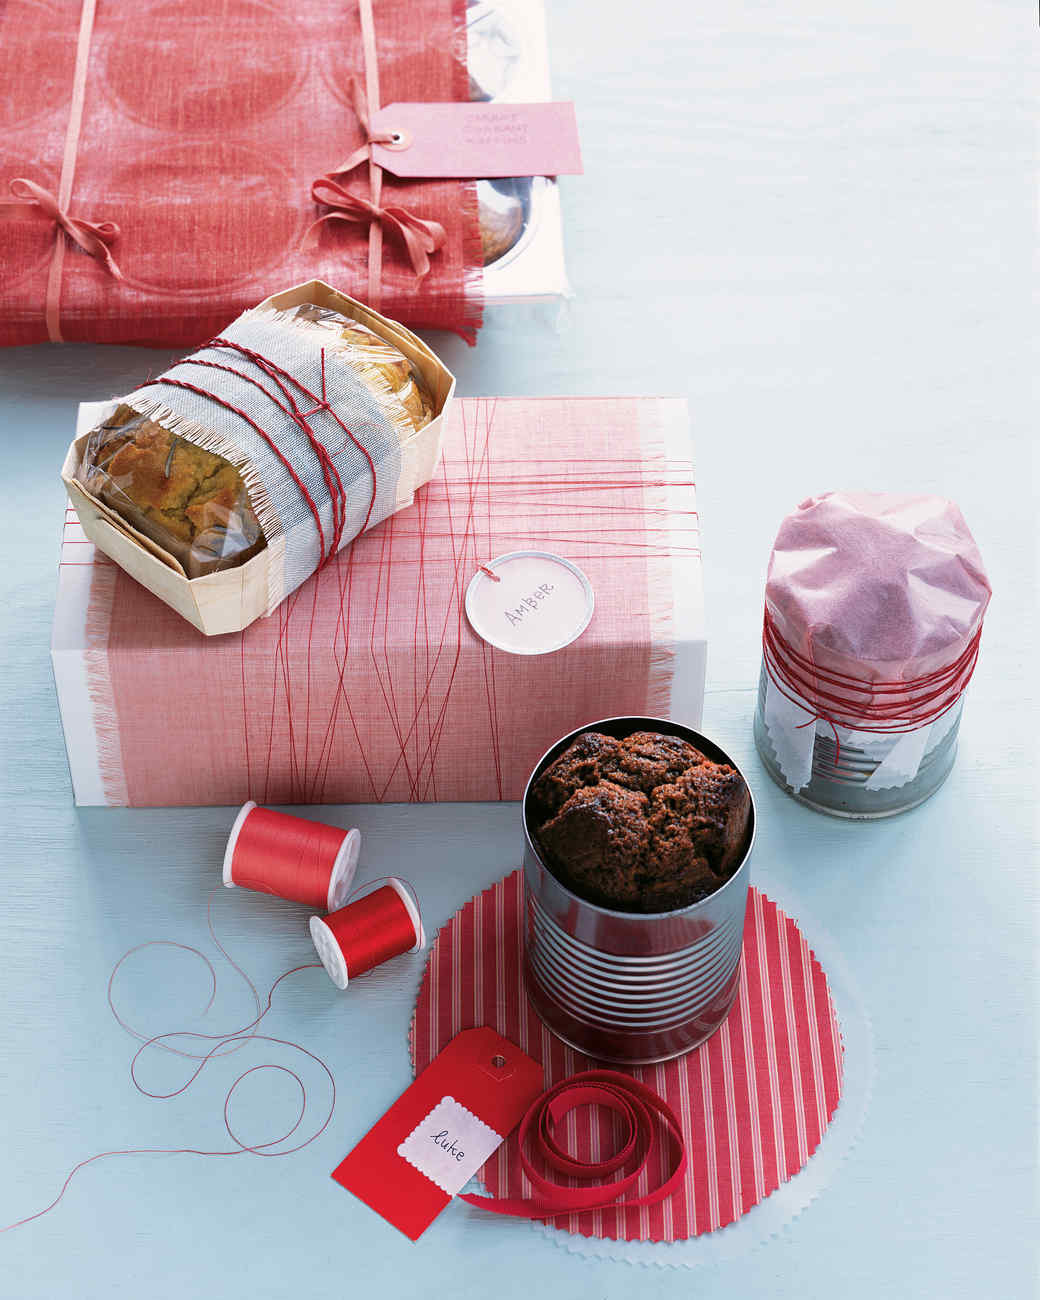 Hostess Gift Ideas For Christmas Dinner Party
 Holiday Hostess Gift Ideas